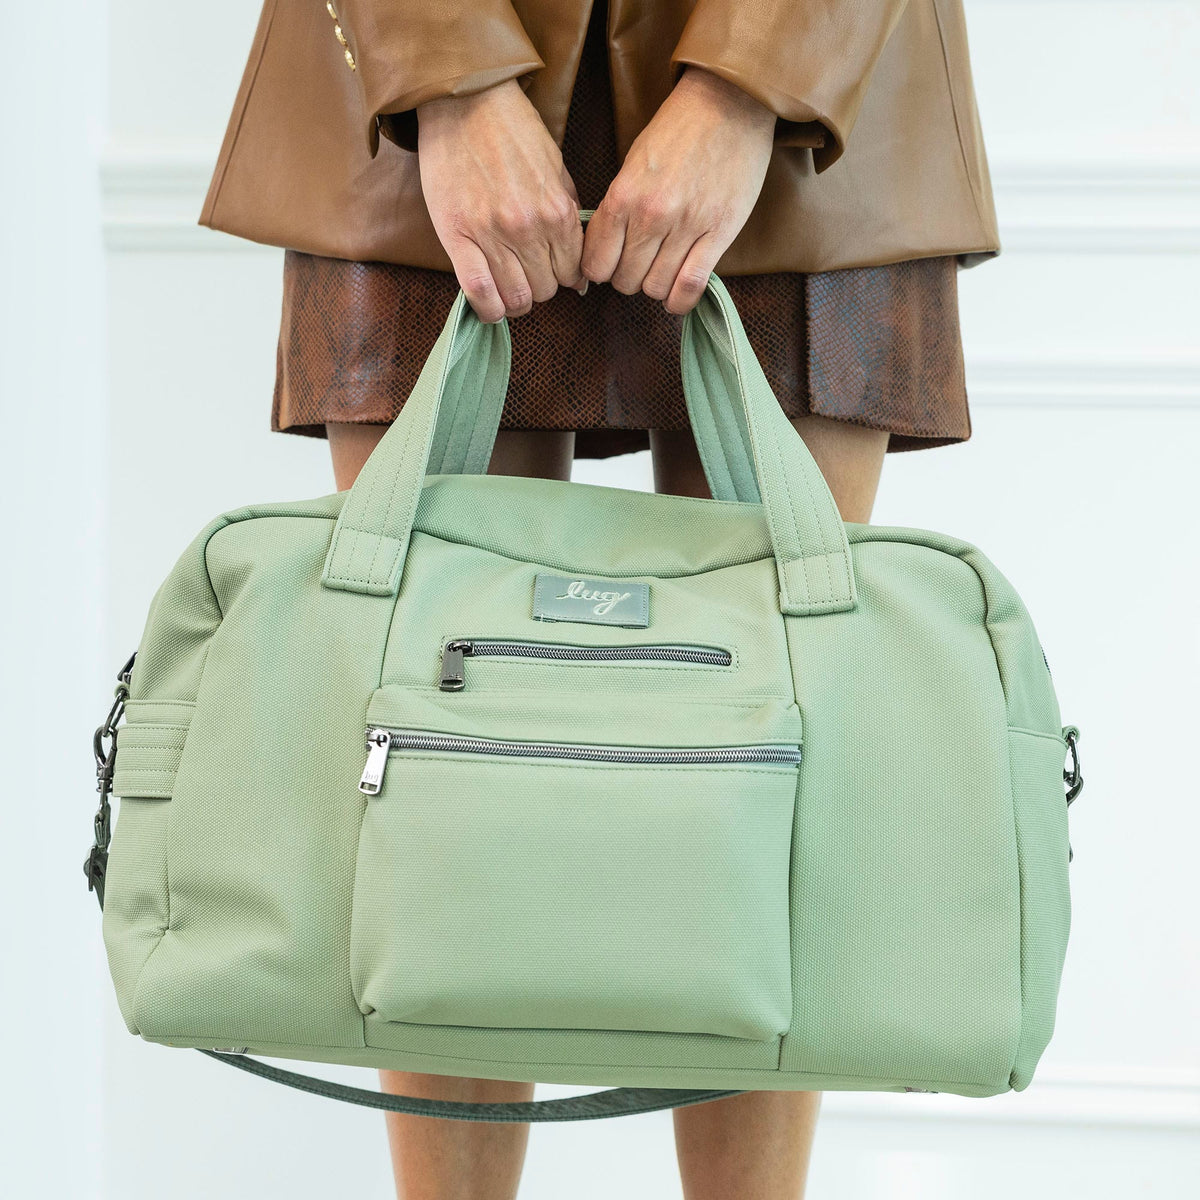 Lug - Wherever you're going, go there in style with the Matte Luxe